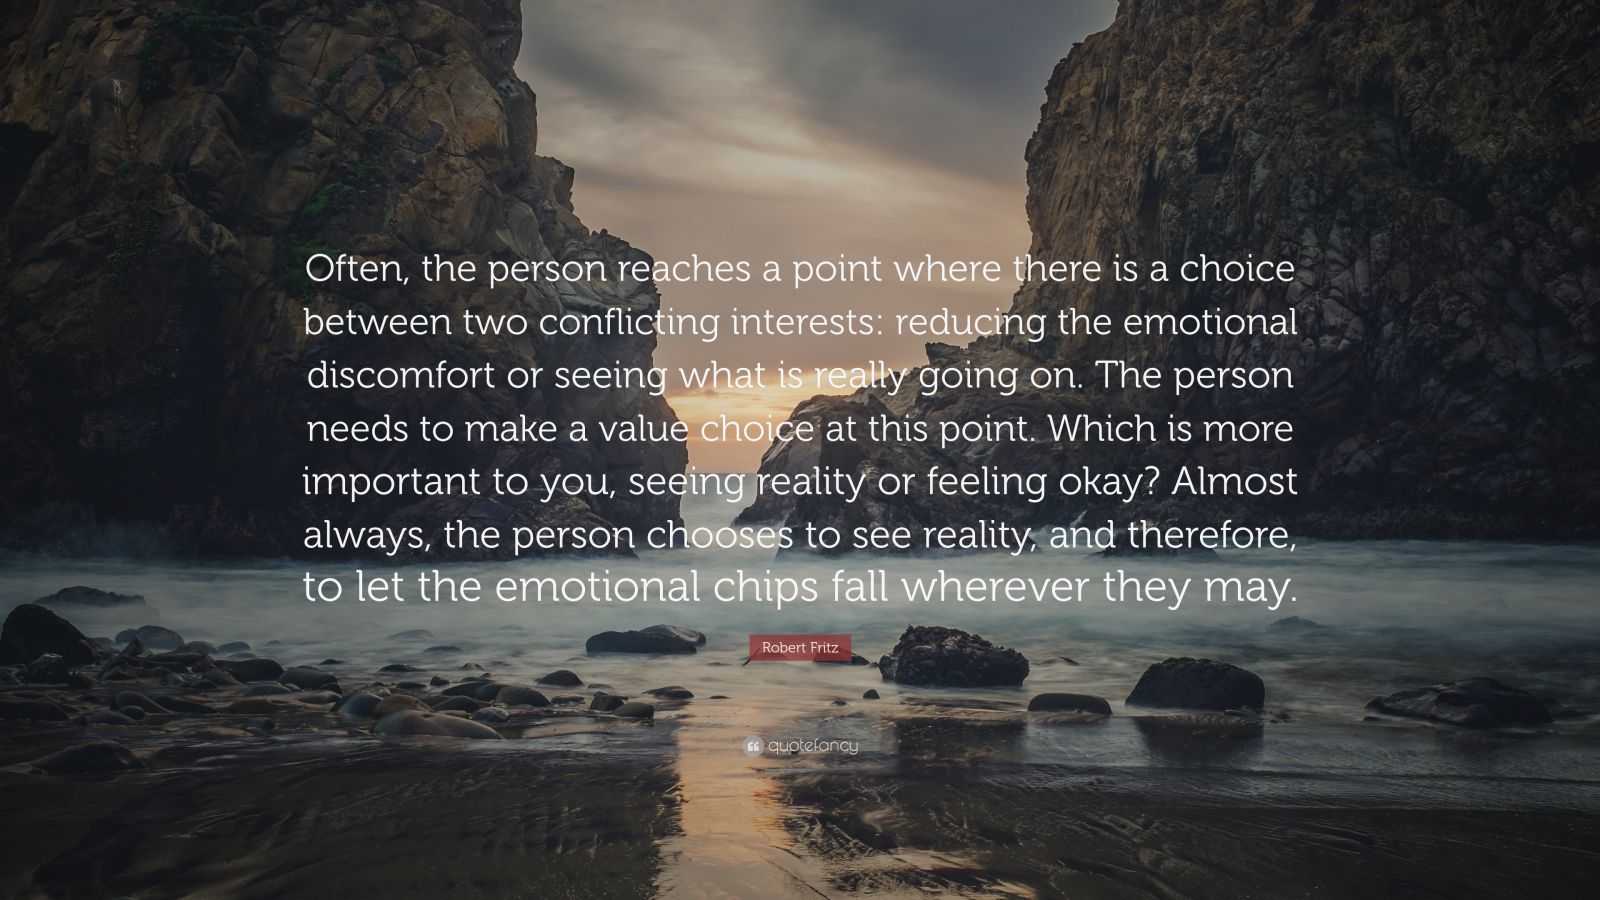 Robert Fritz Quote: “Often, the person reaches a point where there is a ...